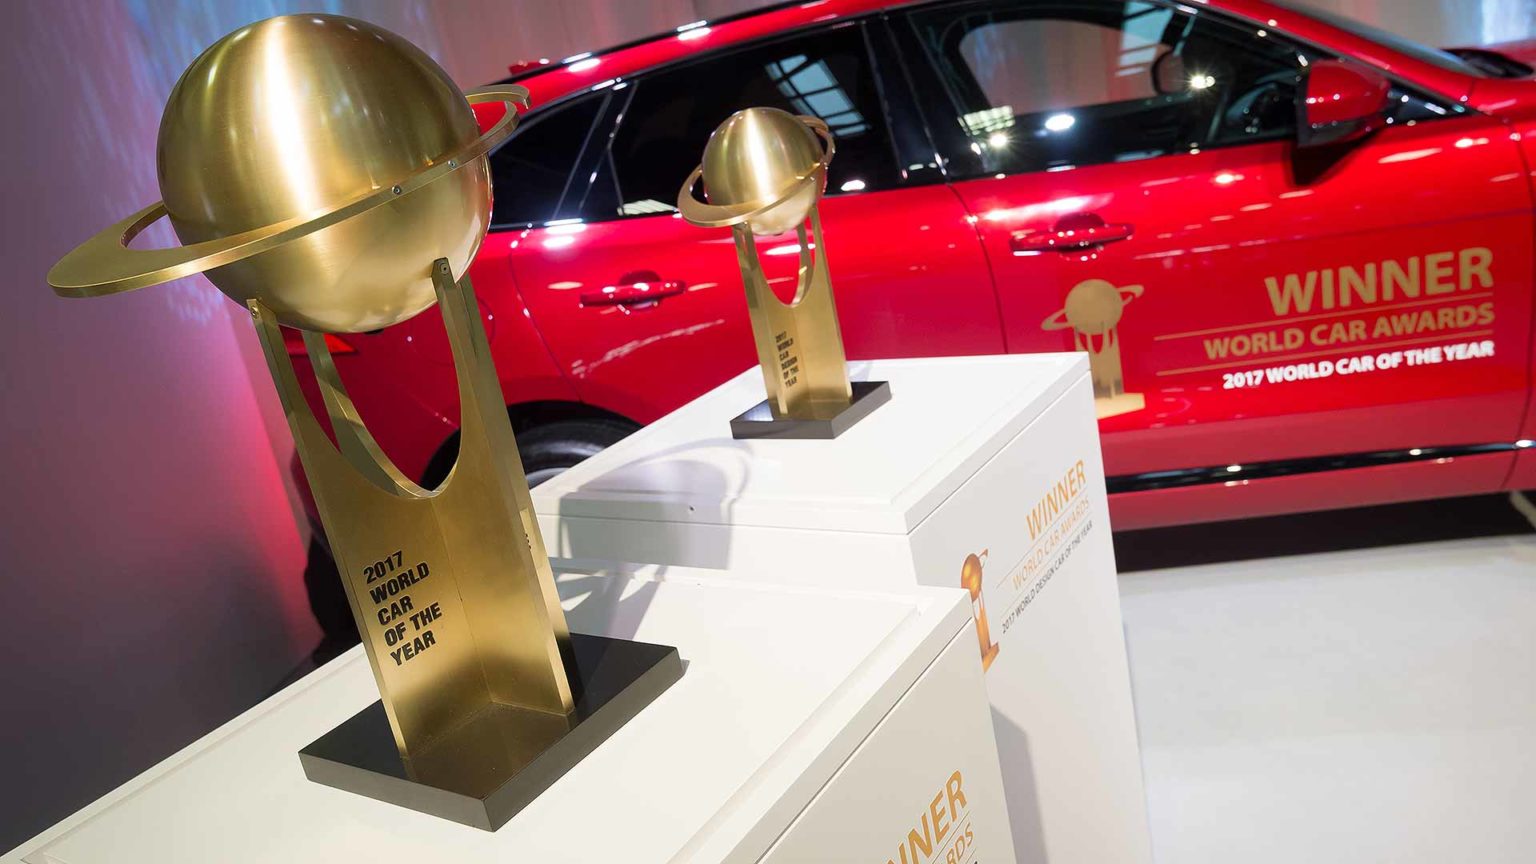 World Car Awards grows to reach 298 million people Motoring Research